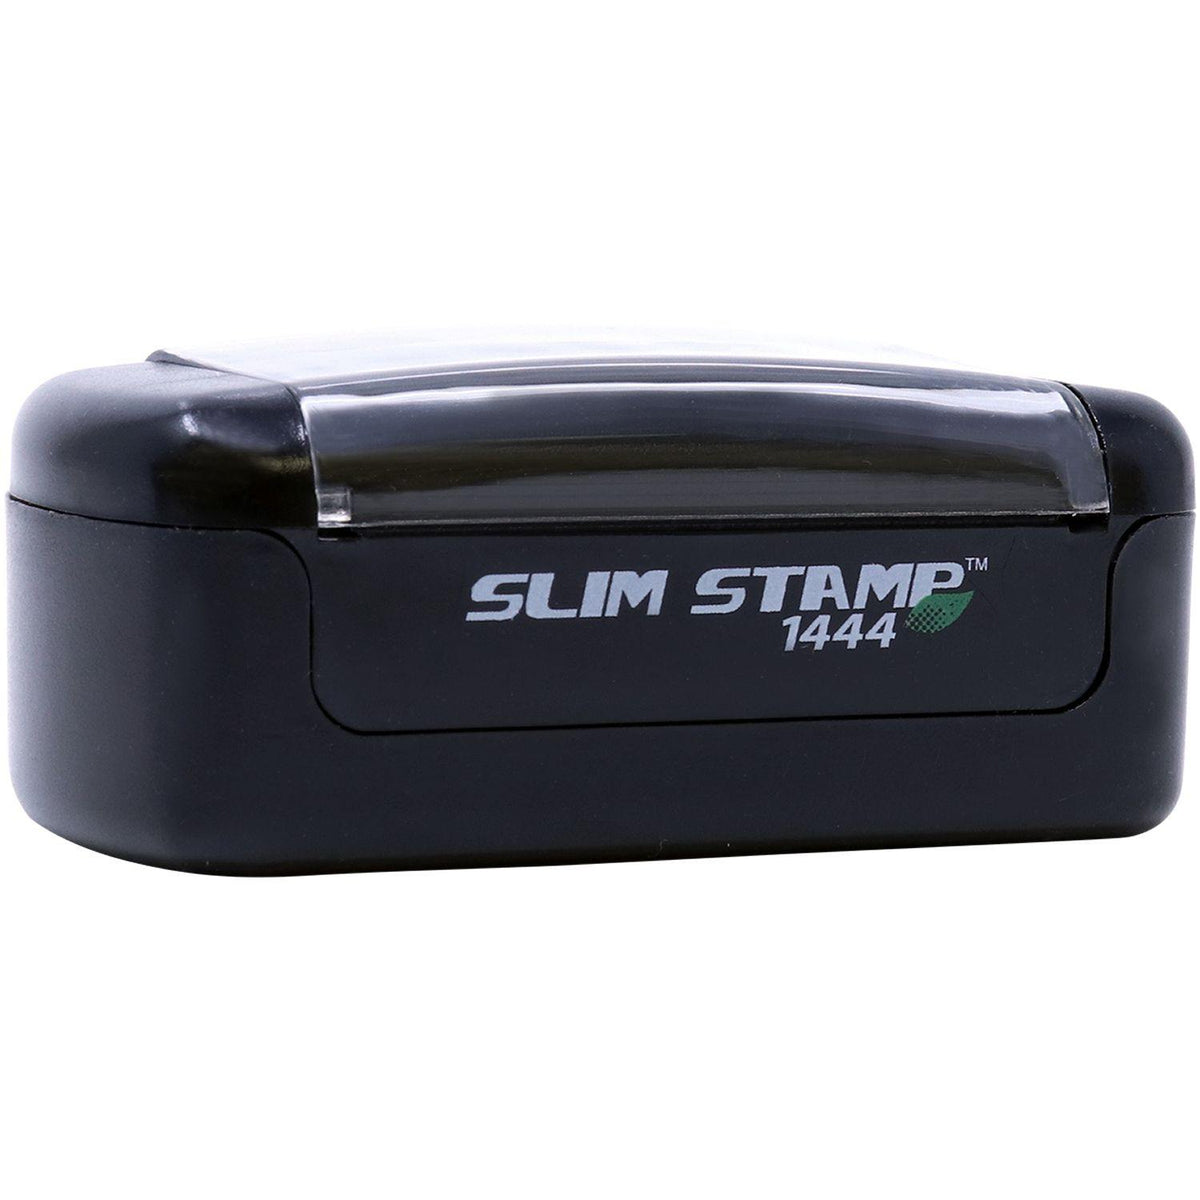 Slim Pre-Inked Admitted Stamp - Engineer Seal Stamps - Brand_Slim, Impression Size_Small, Stamp Type_Pre-Inked Stamp, Type of Use_Medical Office, Type of Use_Office